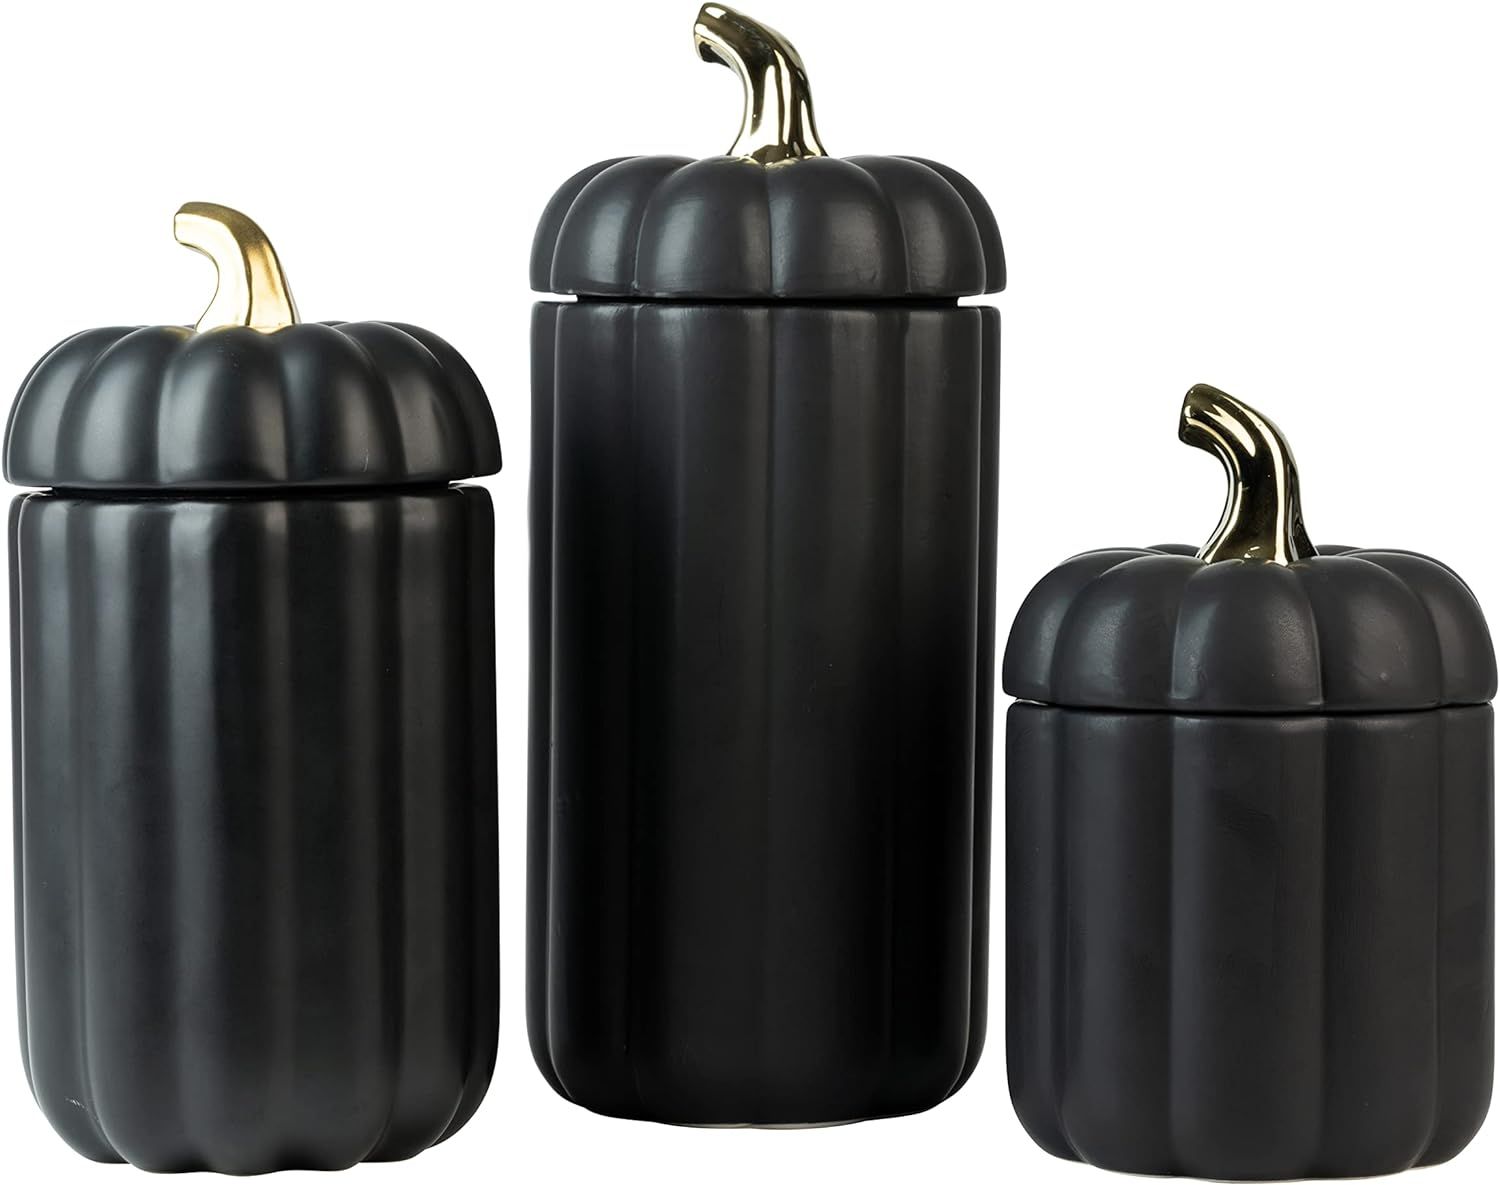 10 Strawberry Street Halloween Canister, Set of 3, Black/Gold | Amazon (US)